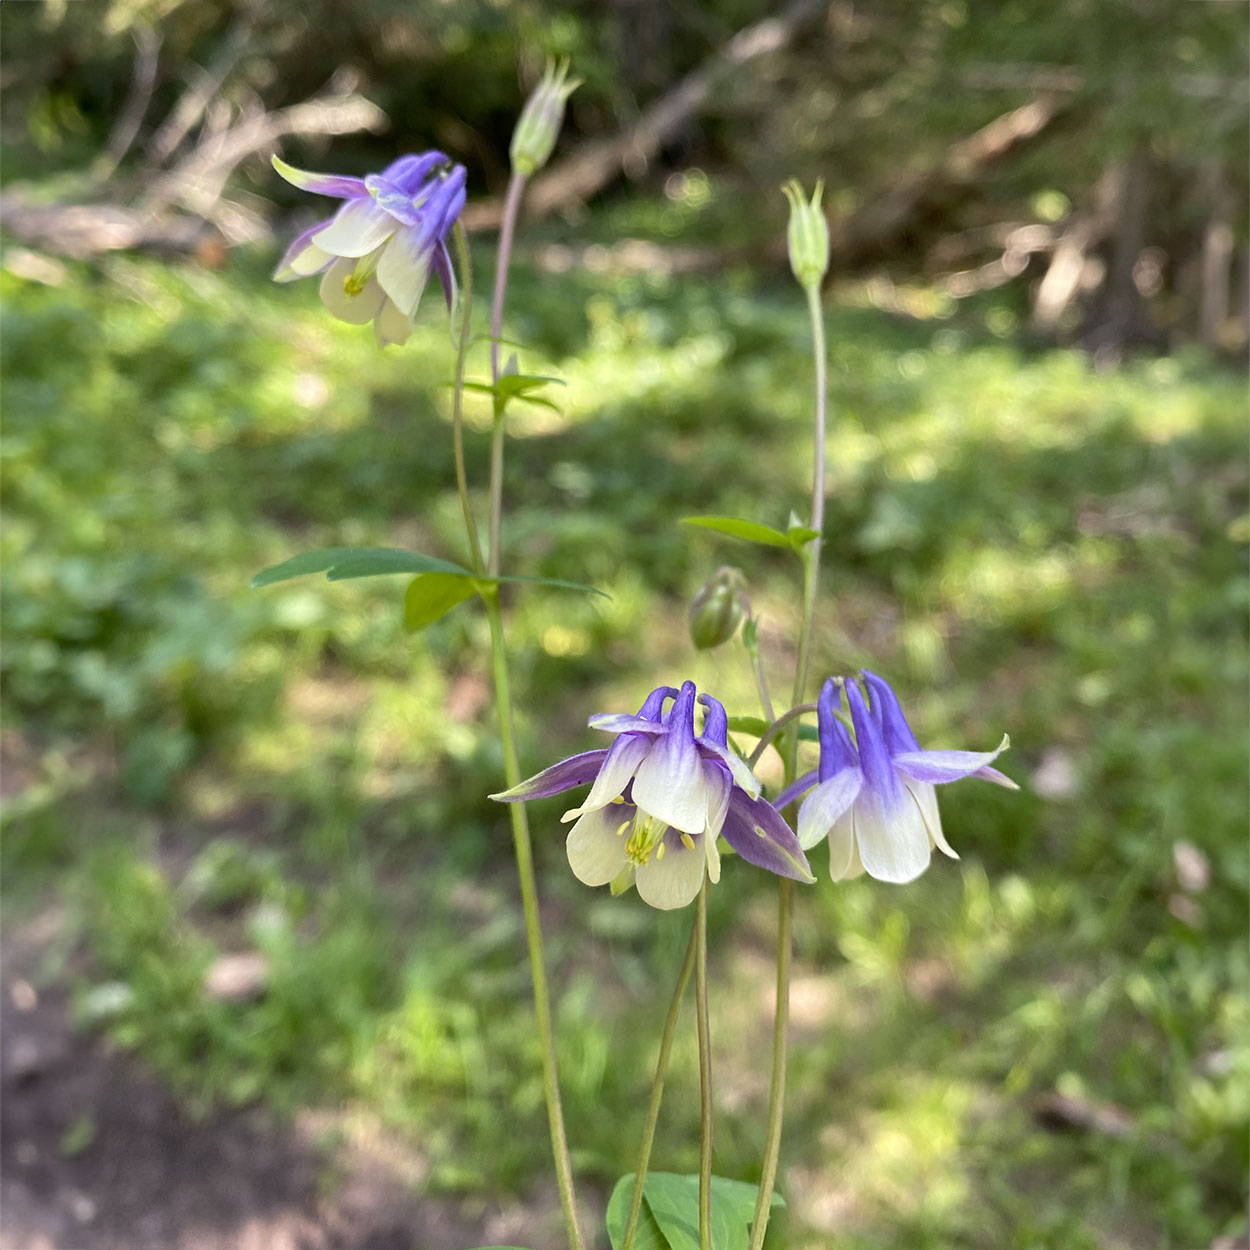 Small-flowered columbine in bloom in a wooded area.